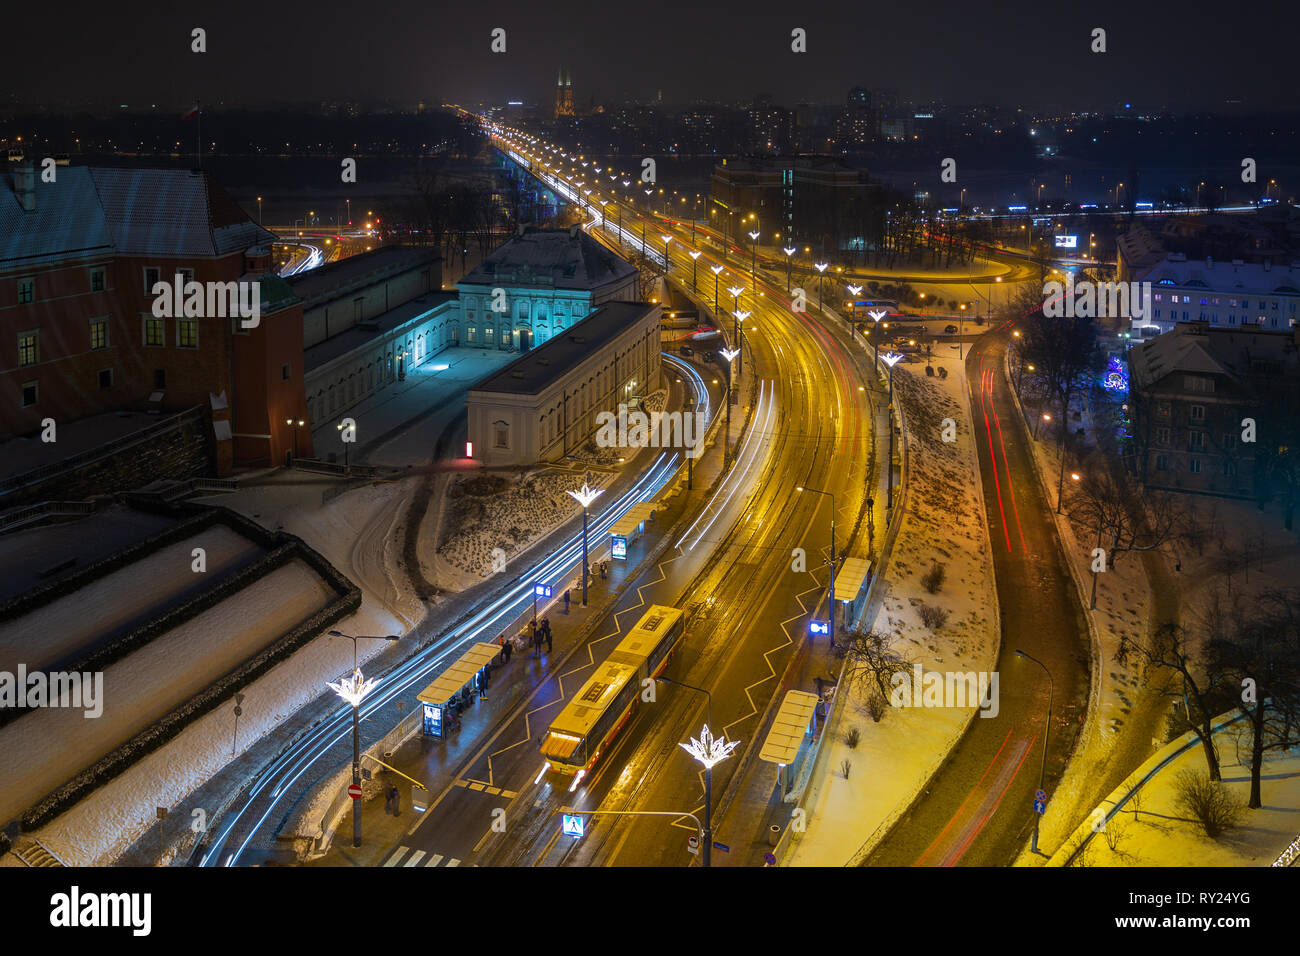 An aerial view of the city's night route in Warsaw Stock Photo